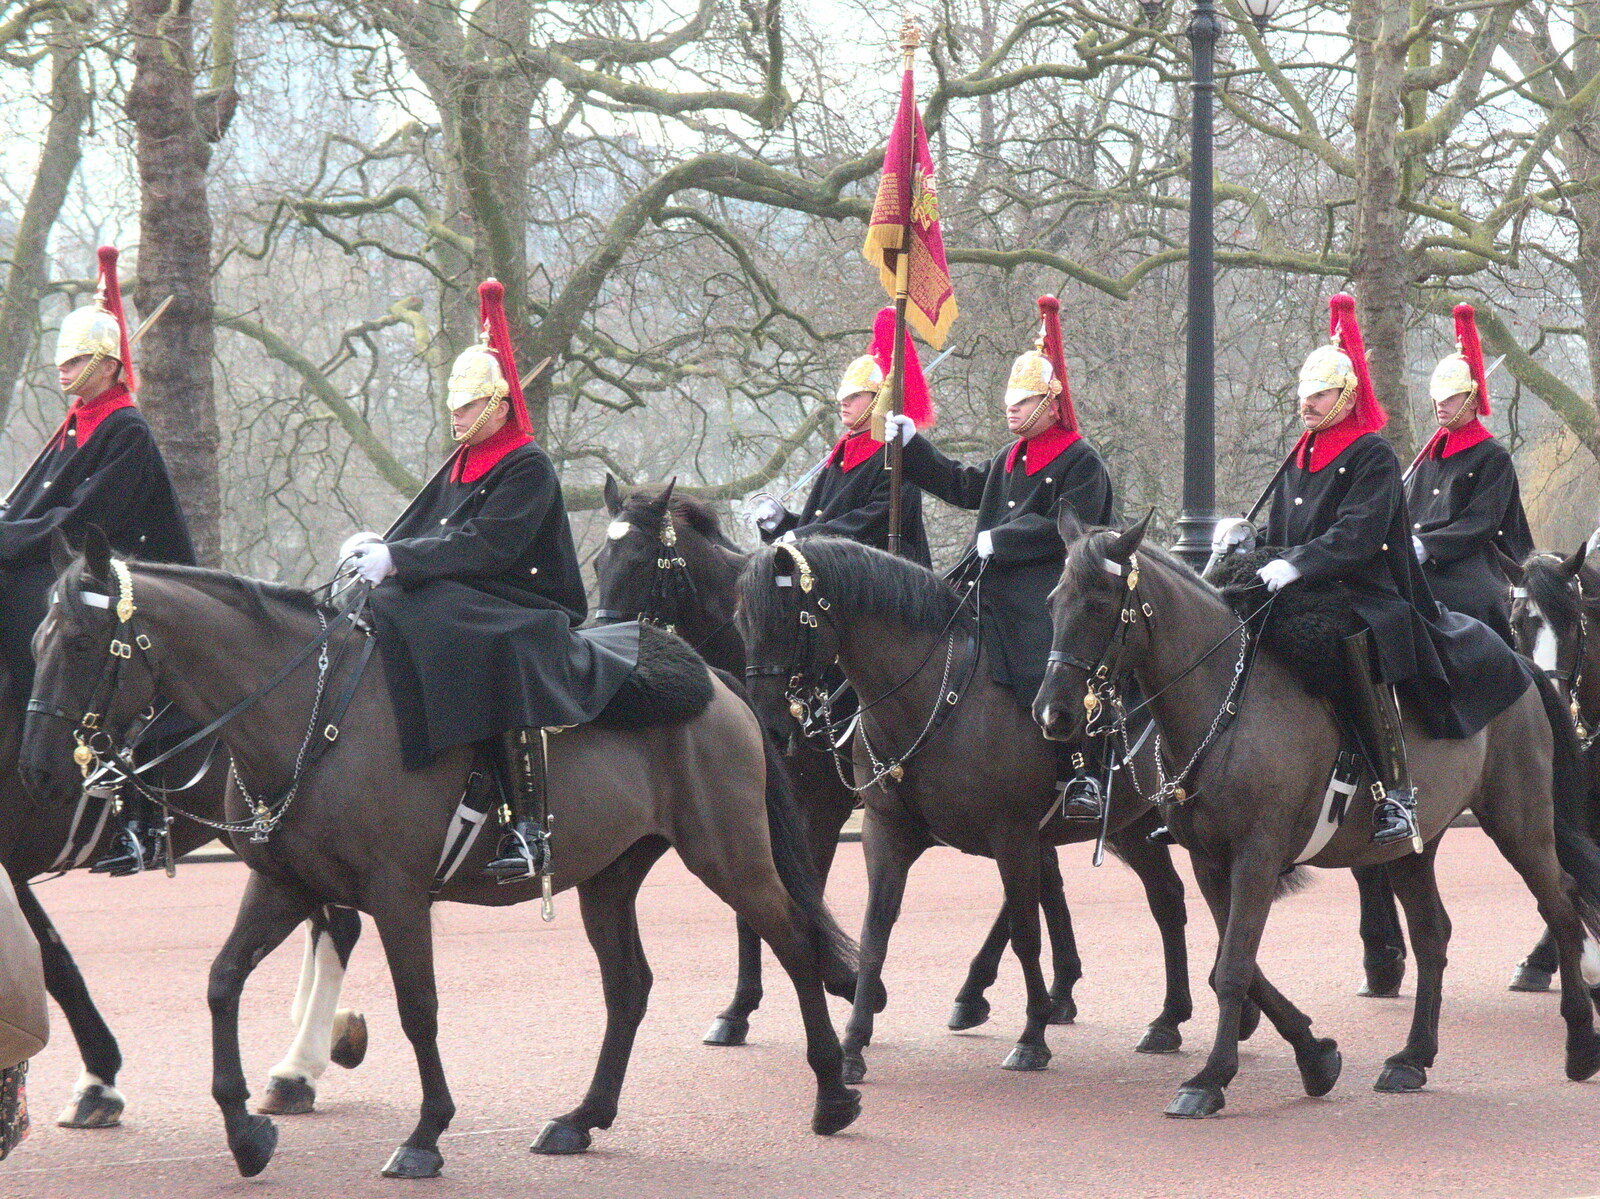 Guardsmen, bearing the Royal Standard, on The Mall from Little Venice and Diss Park, West London and Norfolk - 17th February 2017